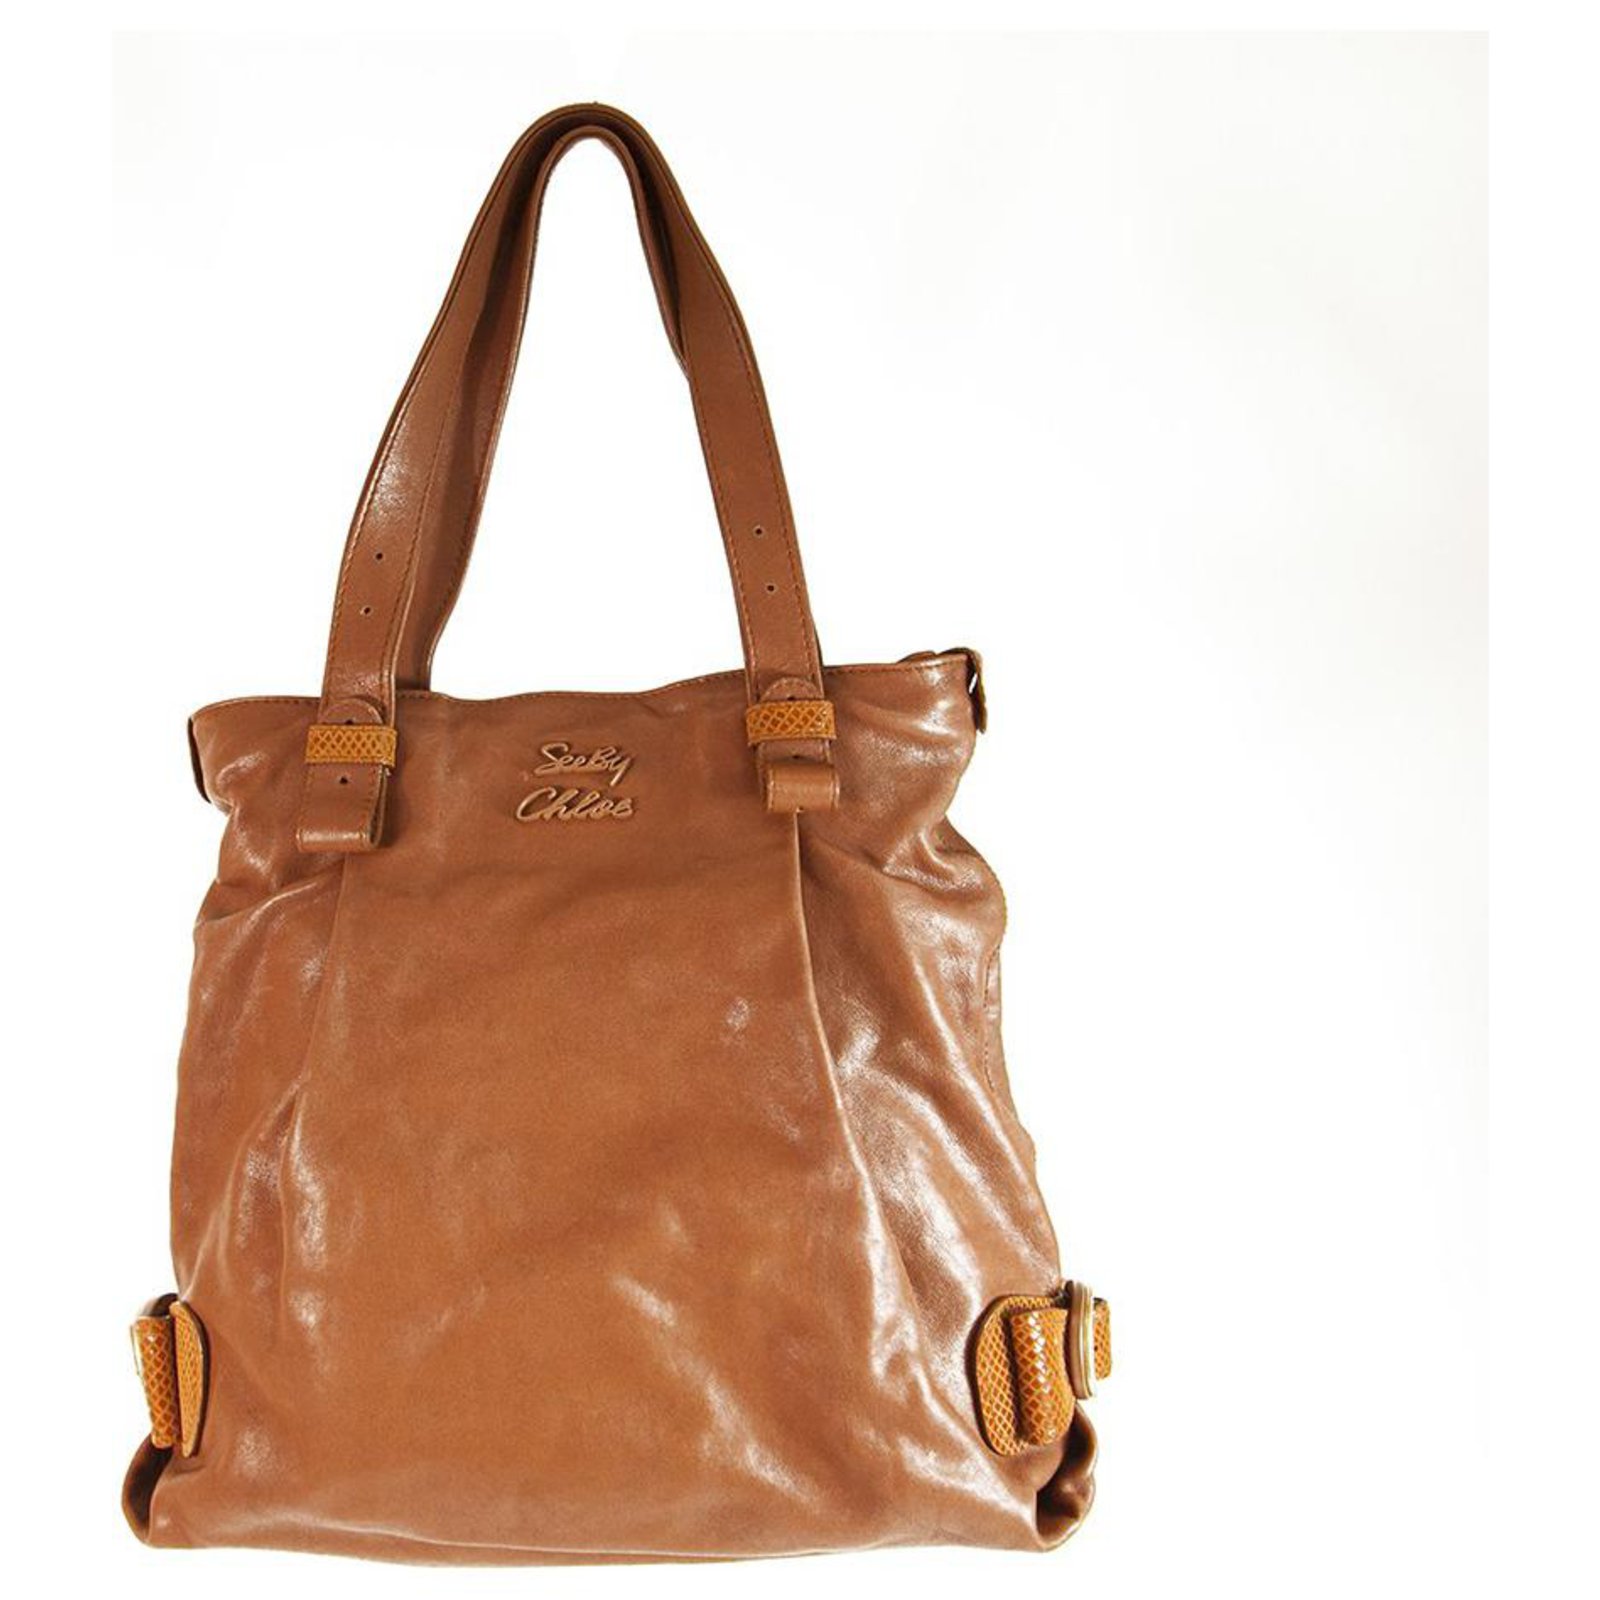 Luxury tote bag in pleated leather for women